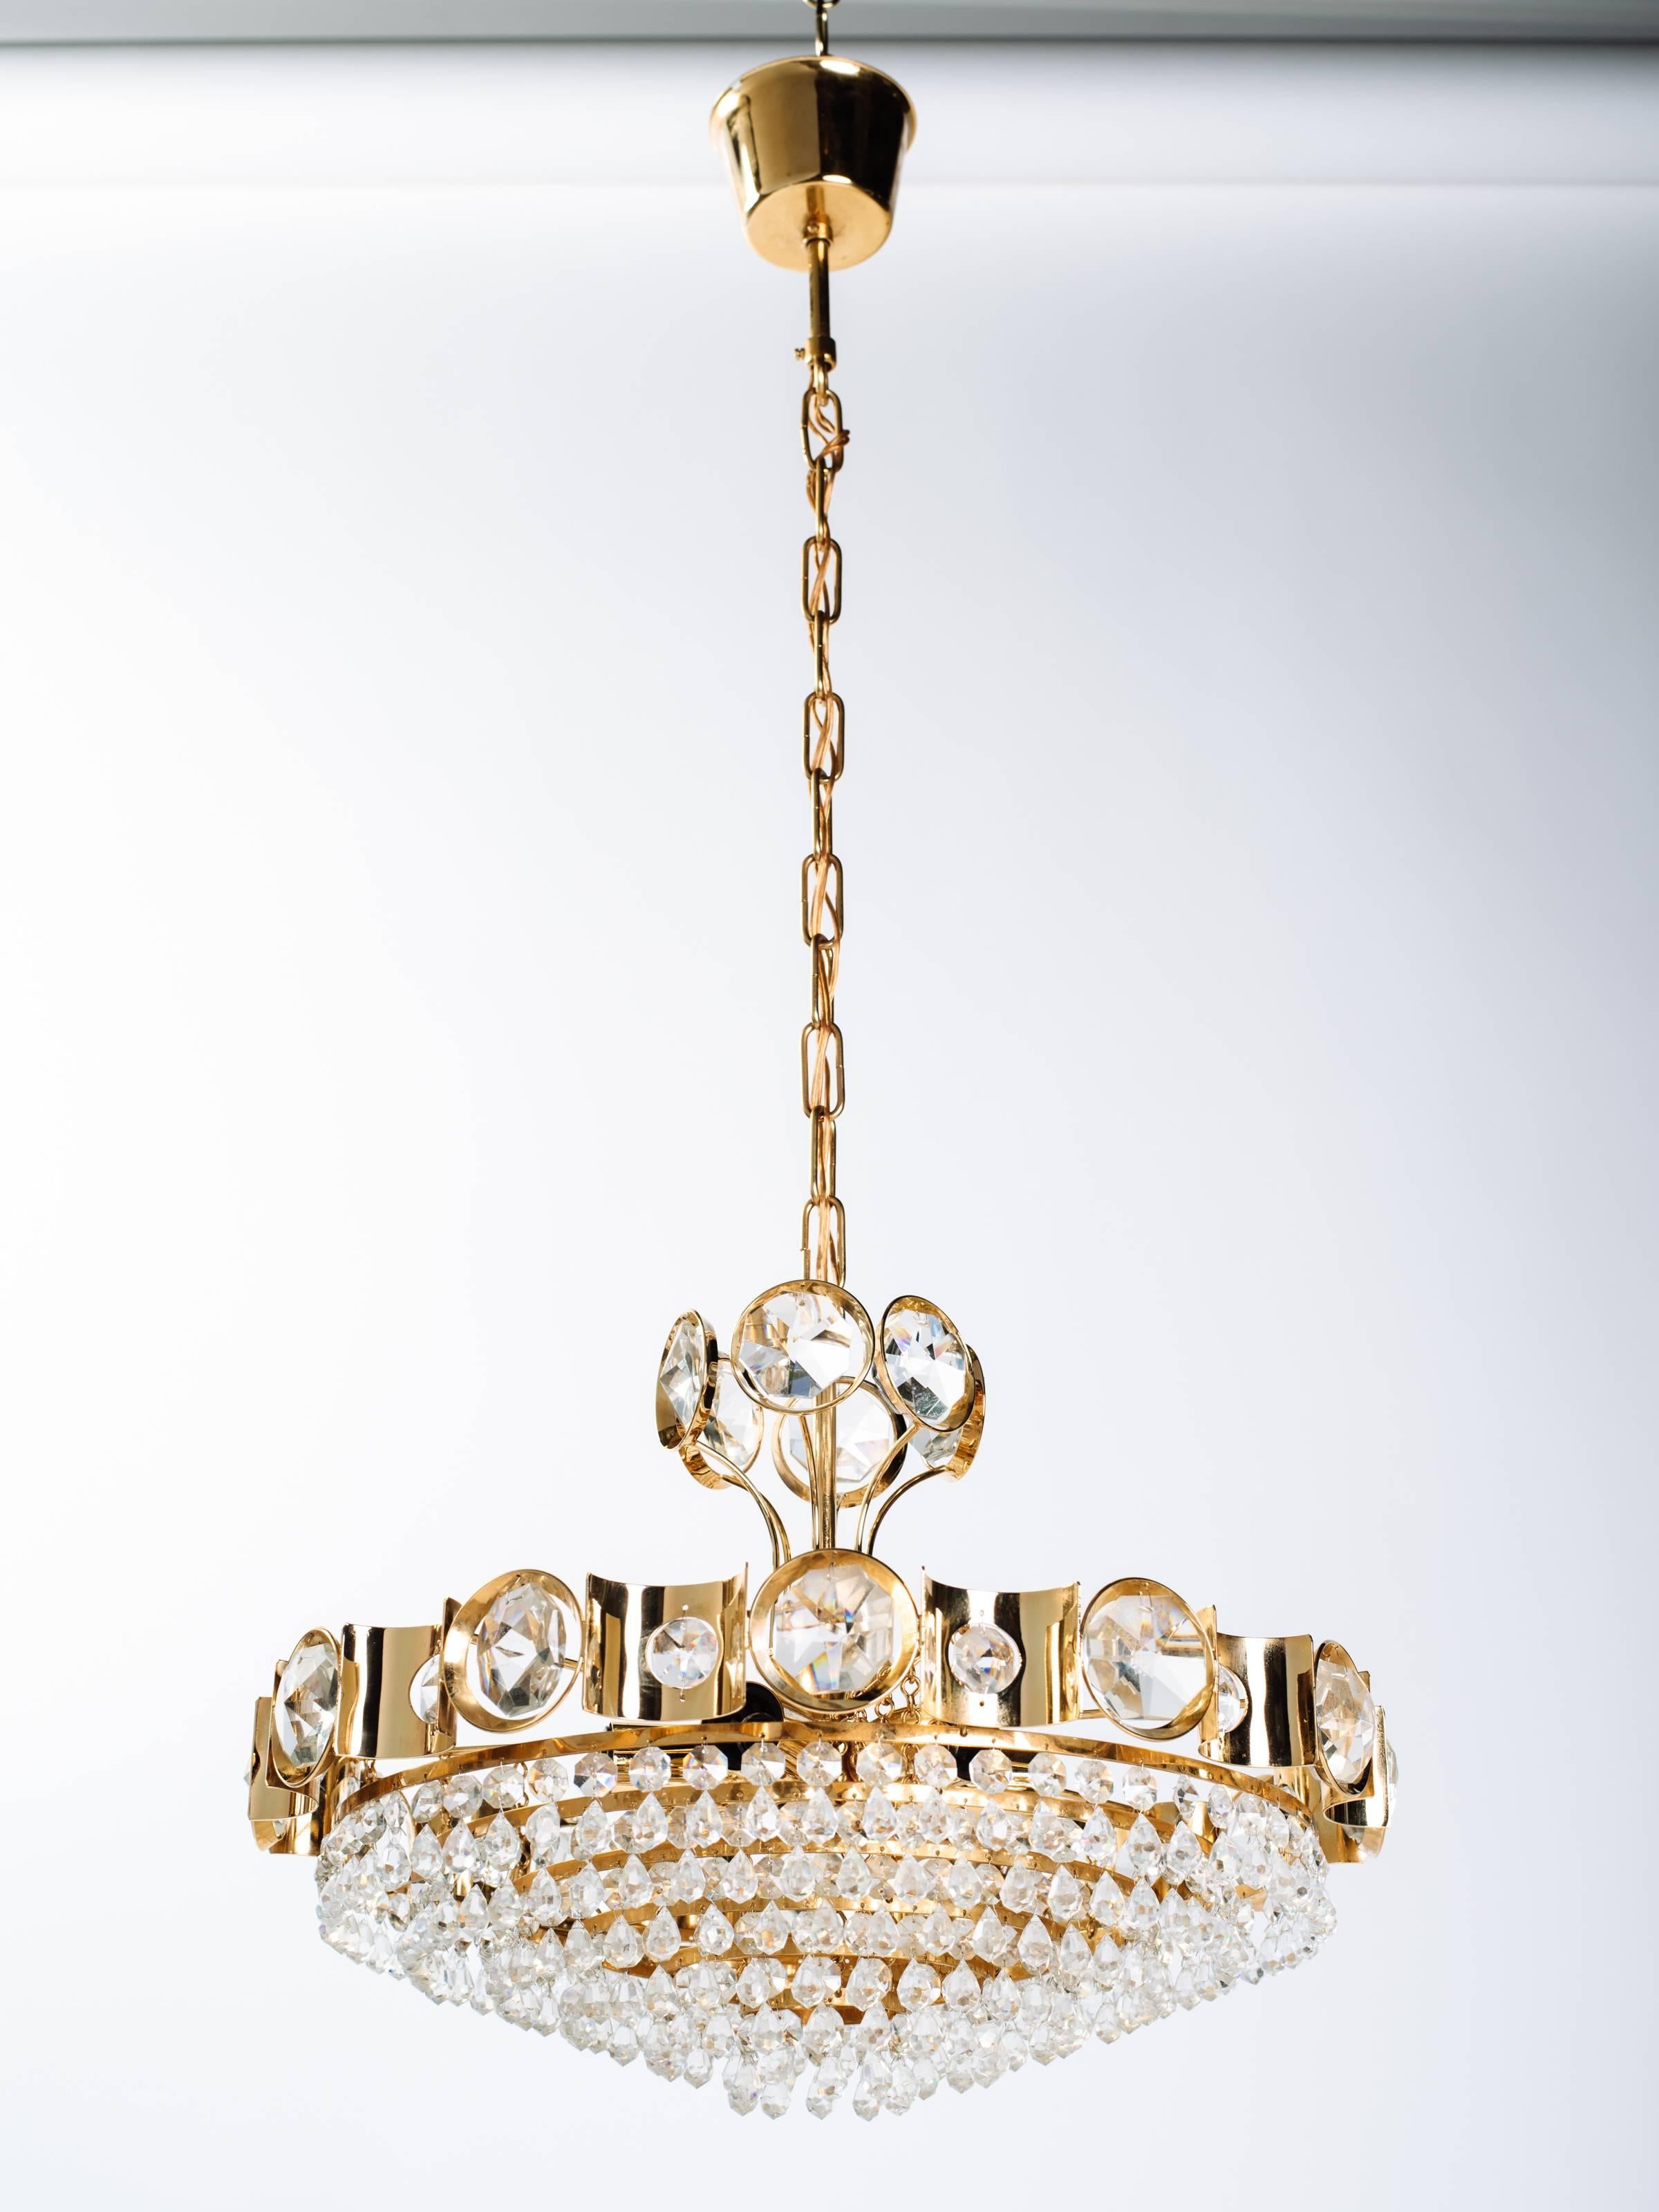 Exquisite Hollywood Regency chandelier with gold-plated over brass frame. The chandelier has a circular multi-tiered design with scalloped details. Fitted with rows of cut crystals and stunning oversized jeweled crystals along the top. Chandelier is